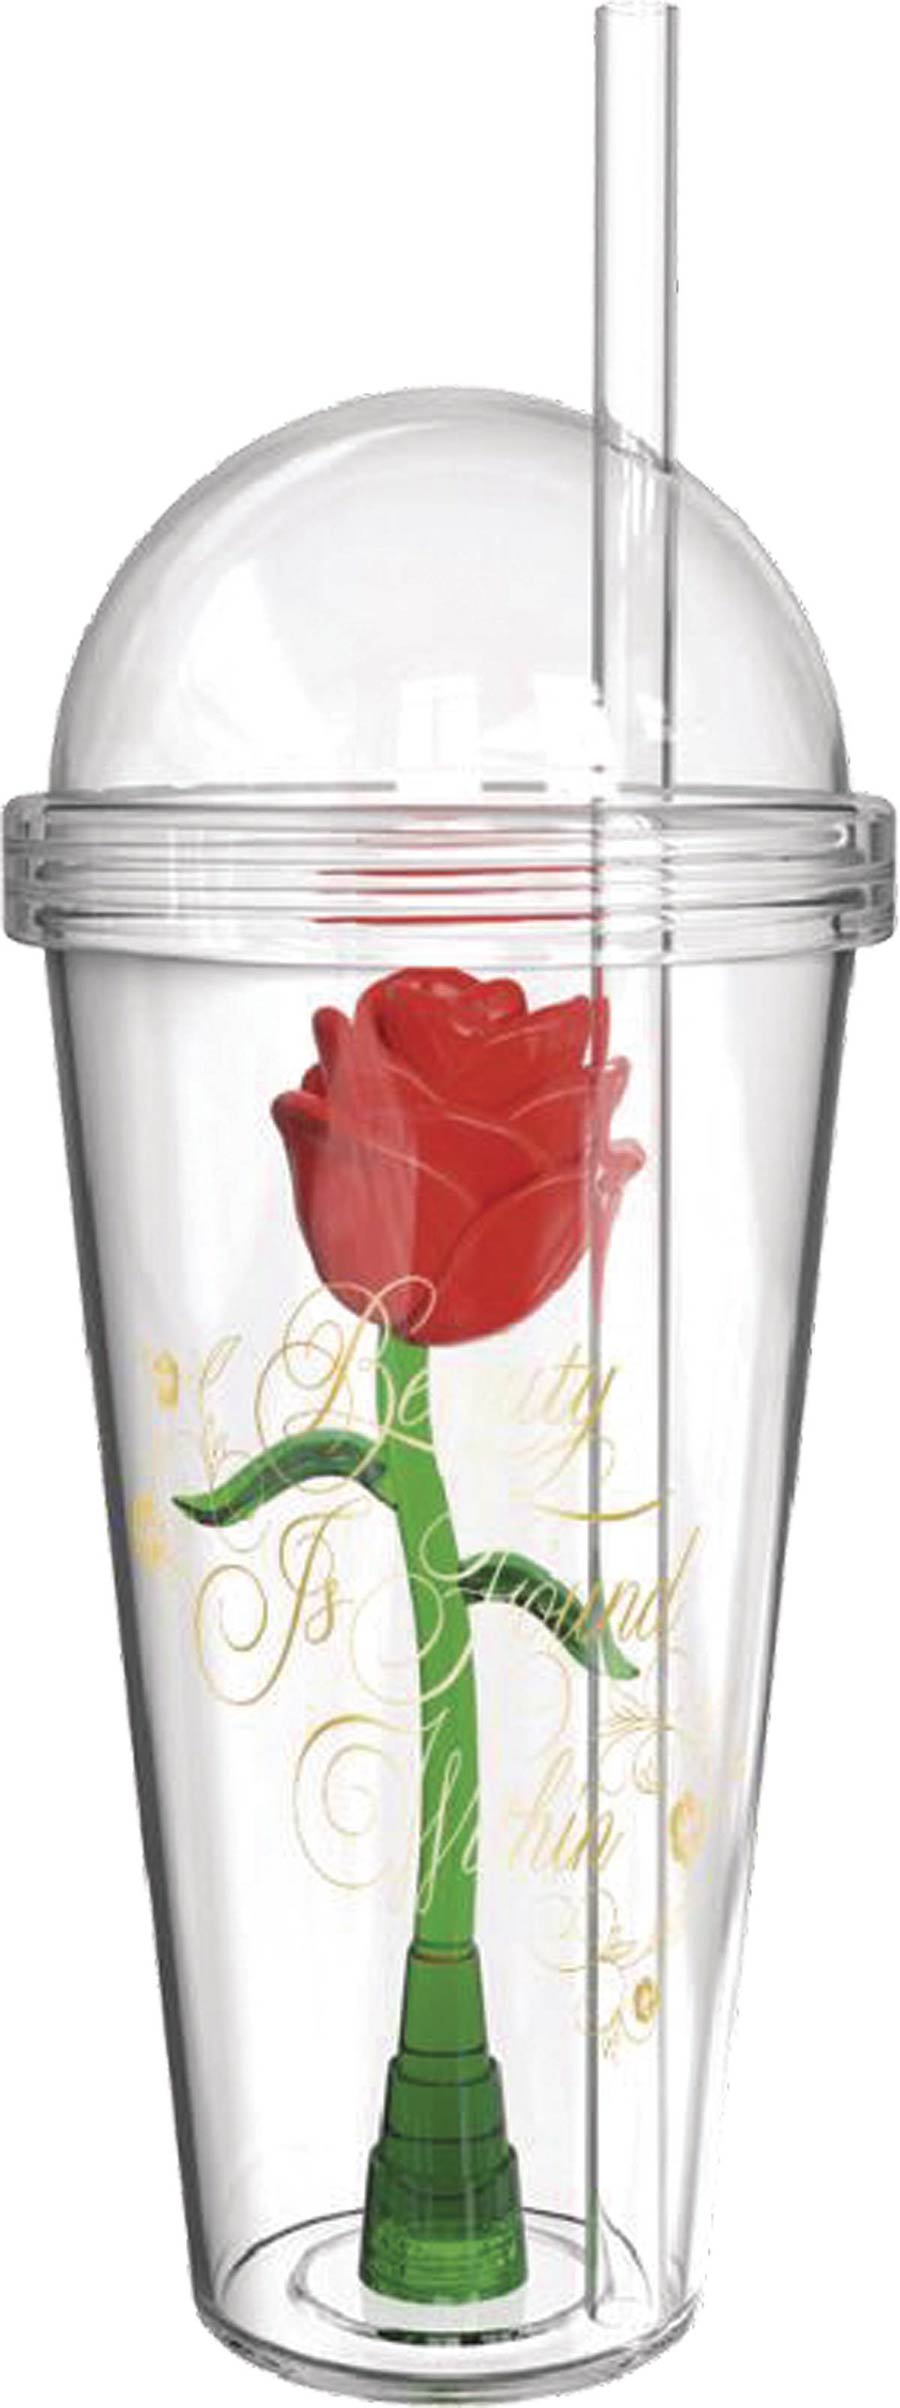 Beauty And The Beast Treasure 16-Ounce Tumbler With Straw